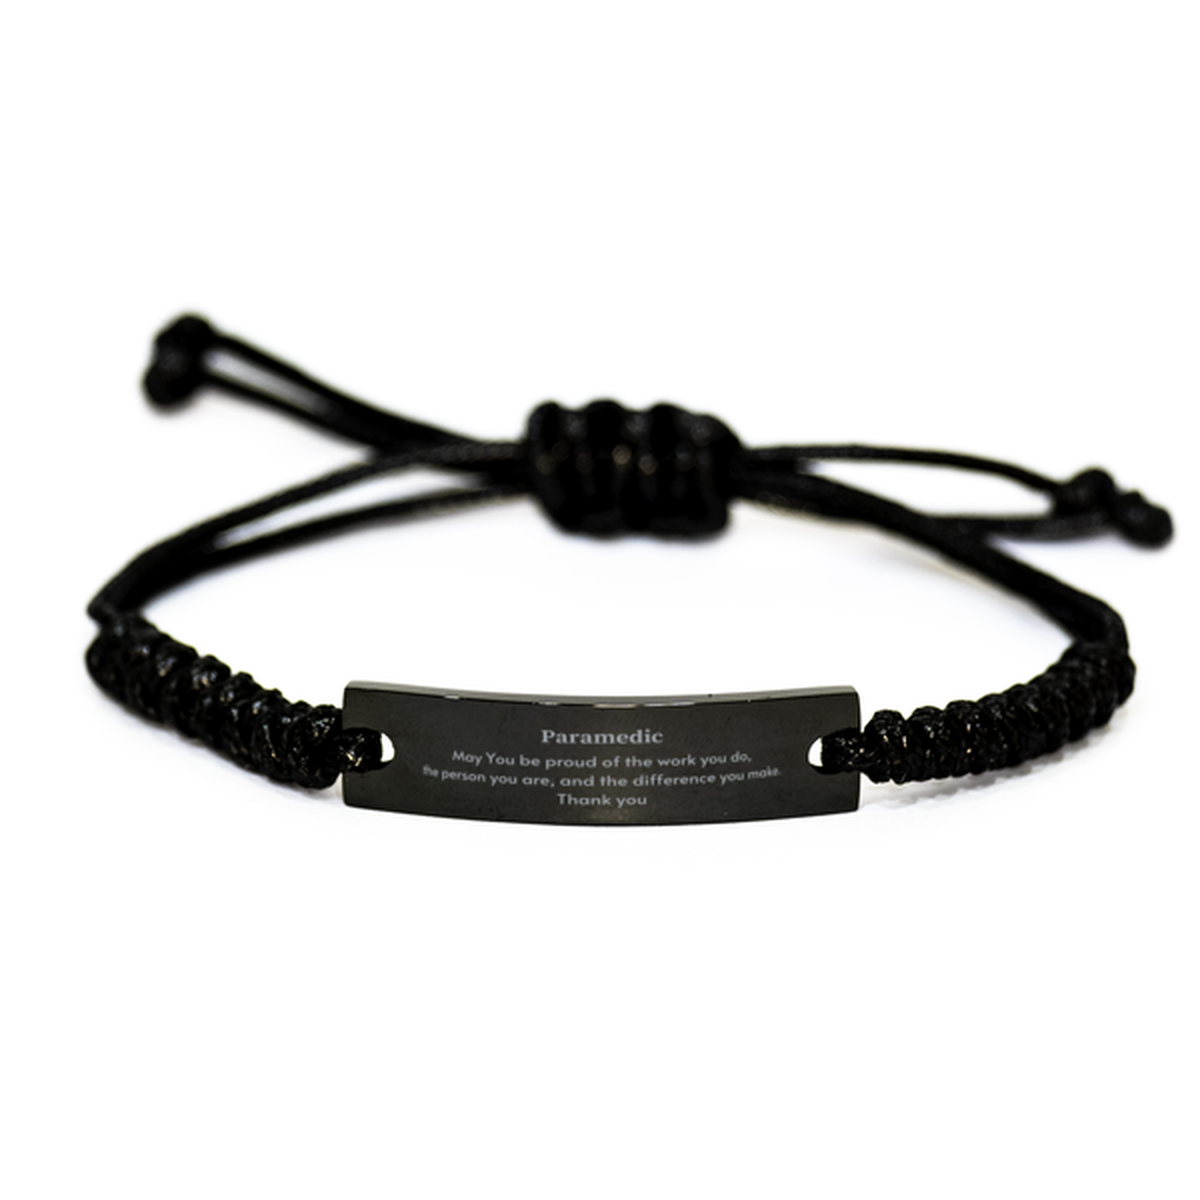 Heartwarming Black Rope Bracelet Retirement Coworkers Gifts for Paramedic, Paramedic May You be proud of the work you do, the person you are Gifts for Boss Men Women Friends